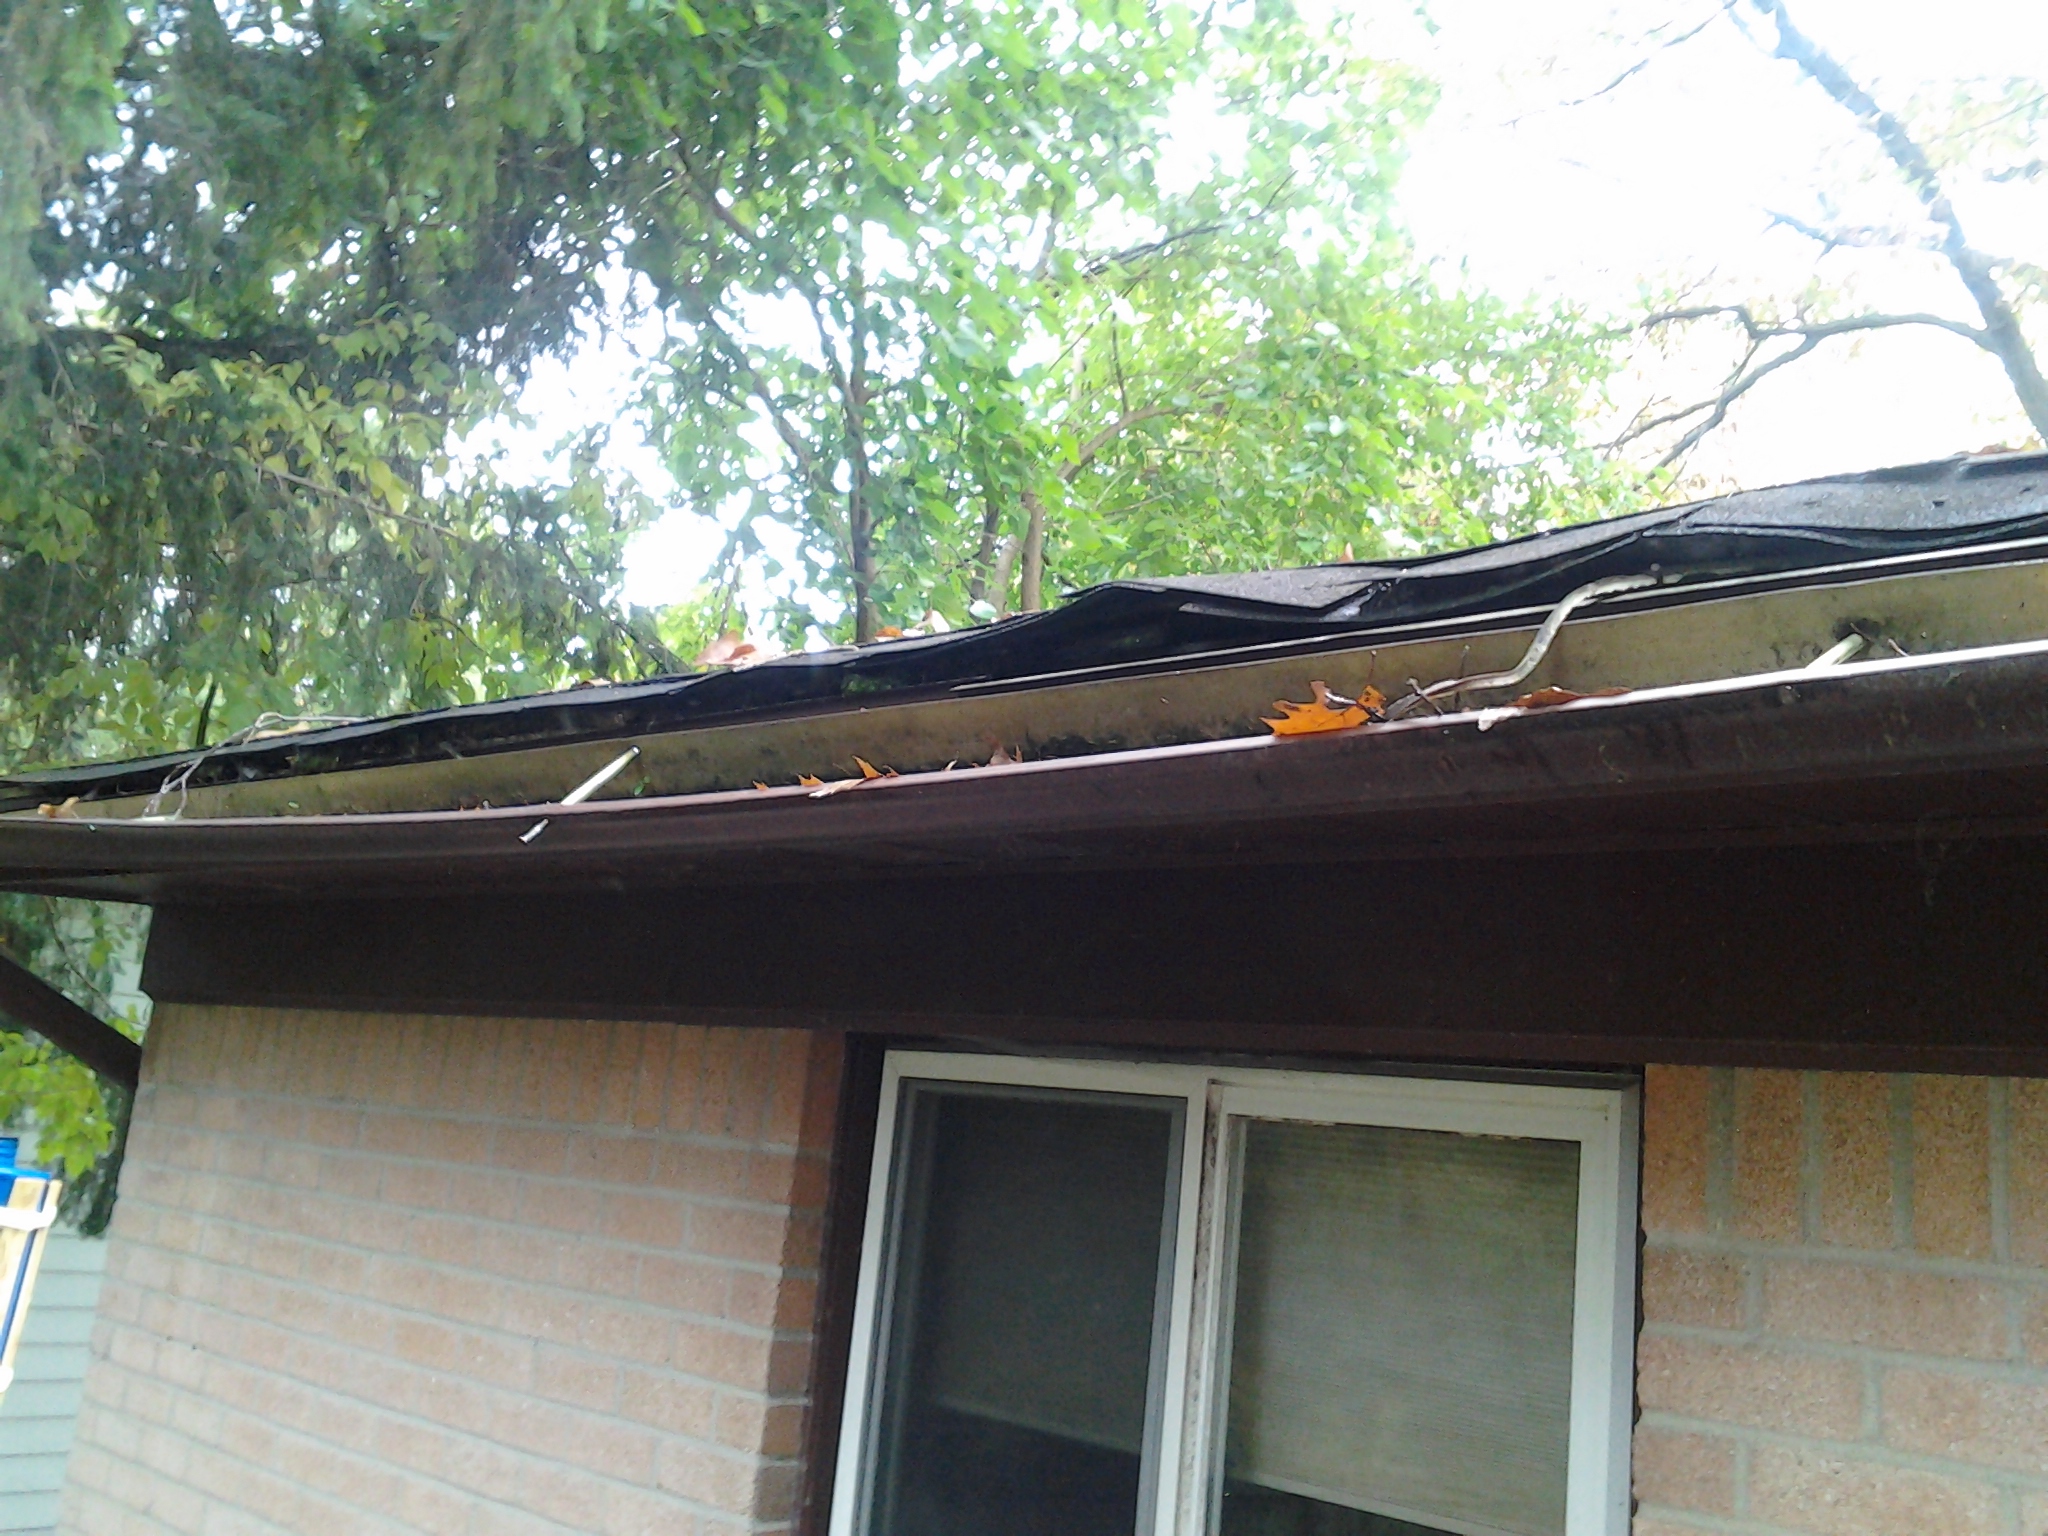 This is what the gutters looked like BEFORE we started work that we were accused of knocking off.